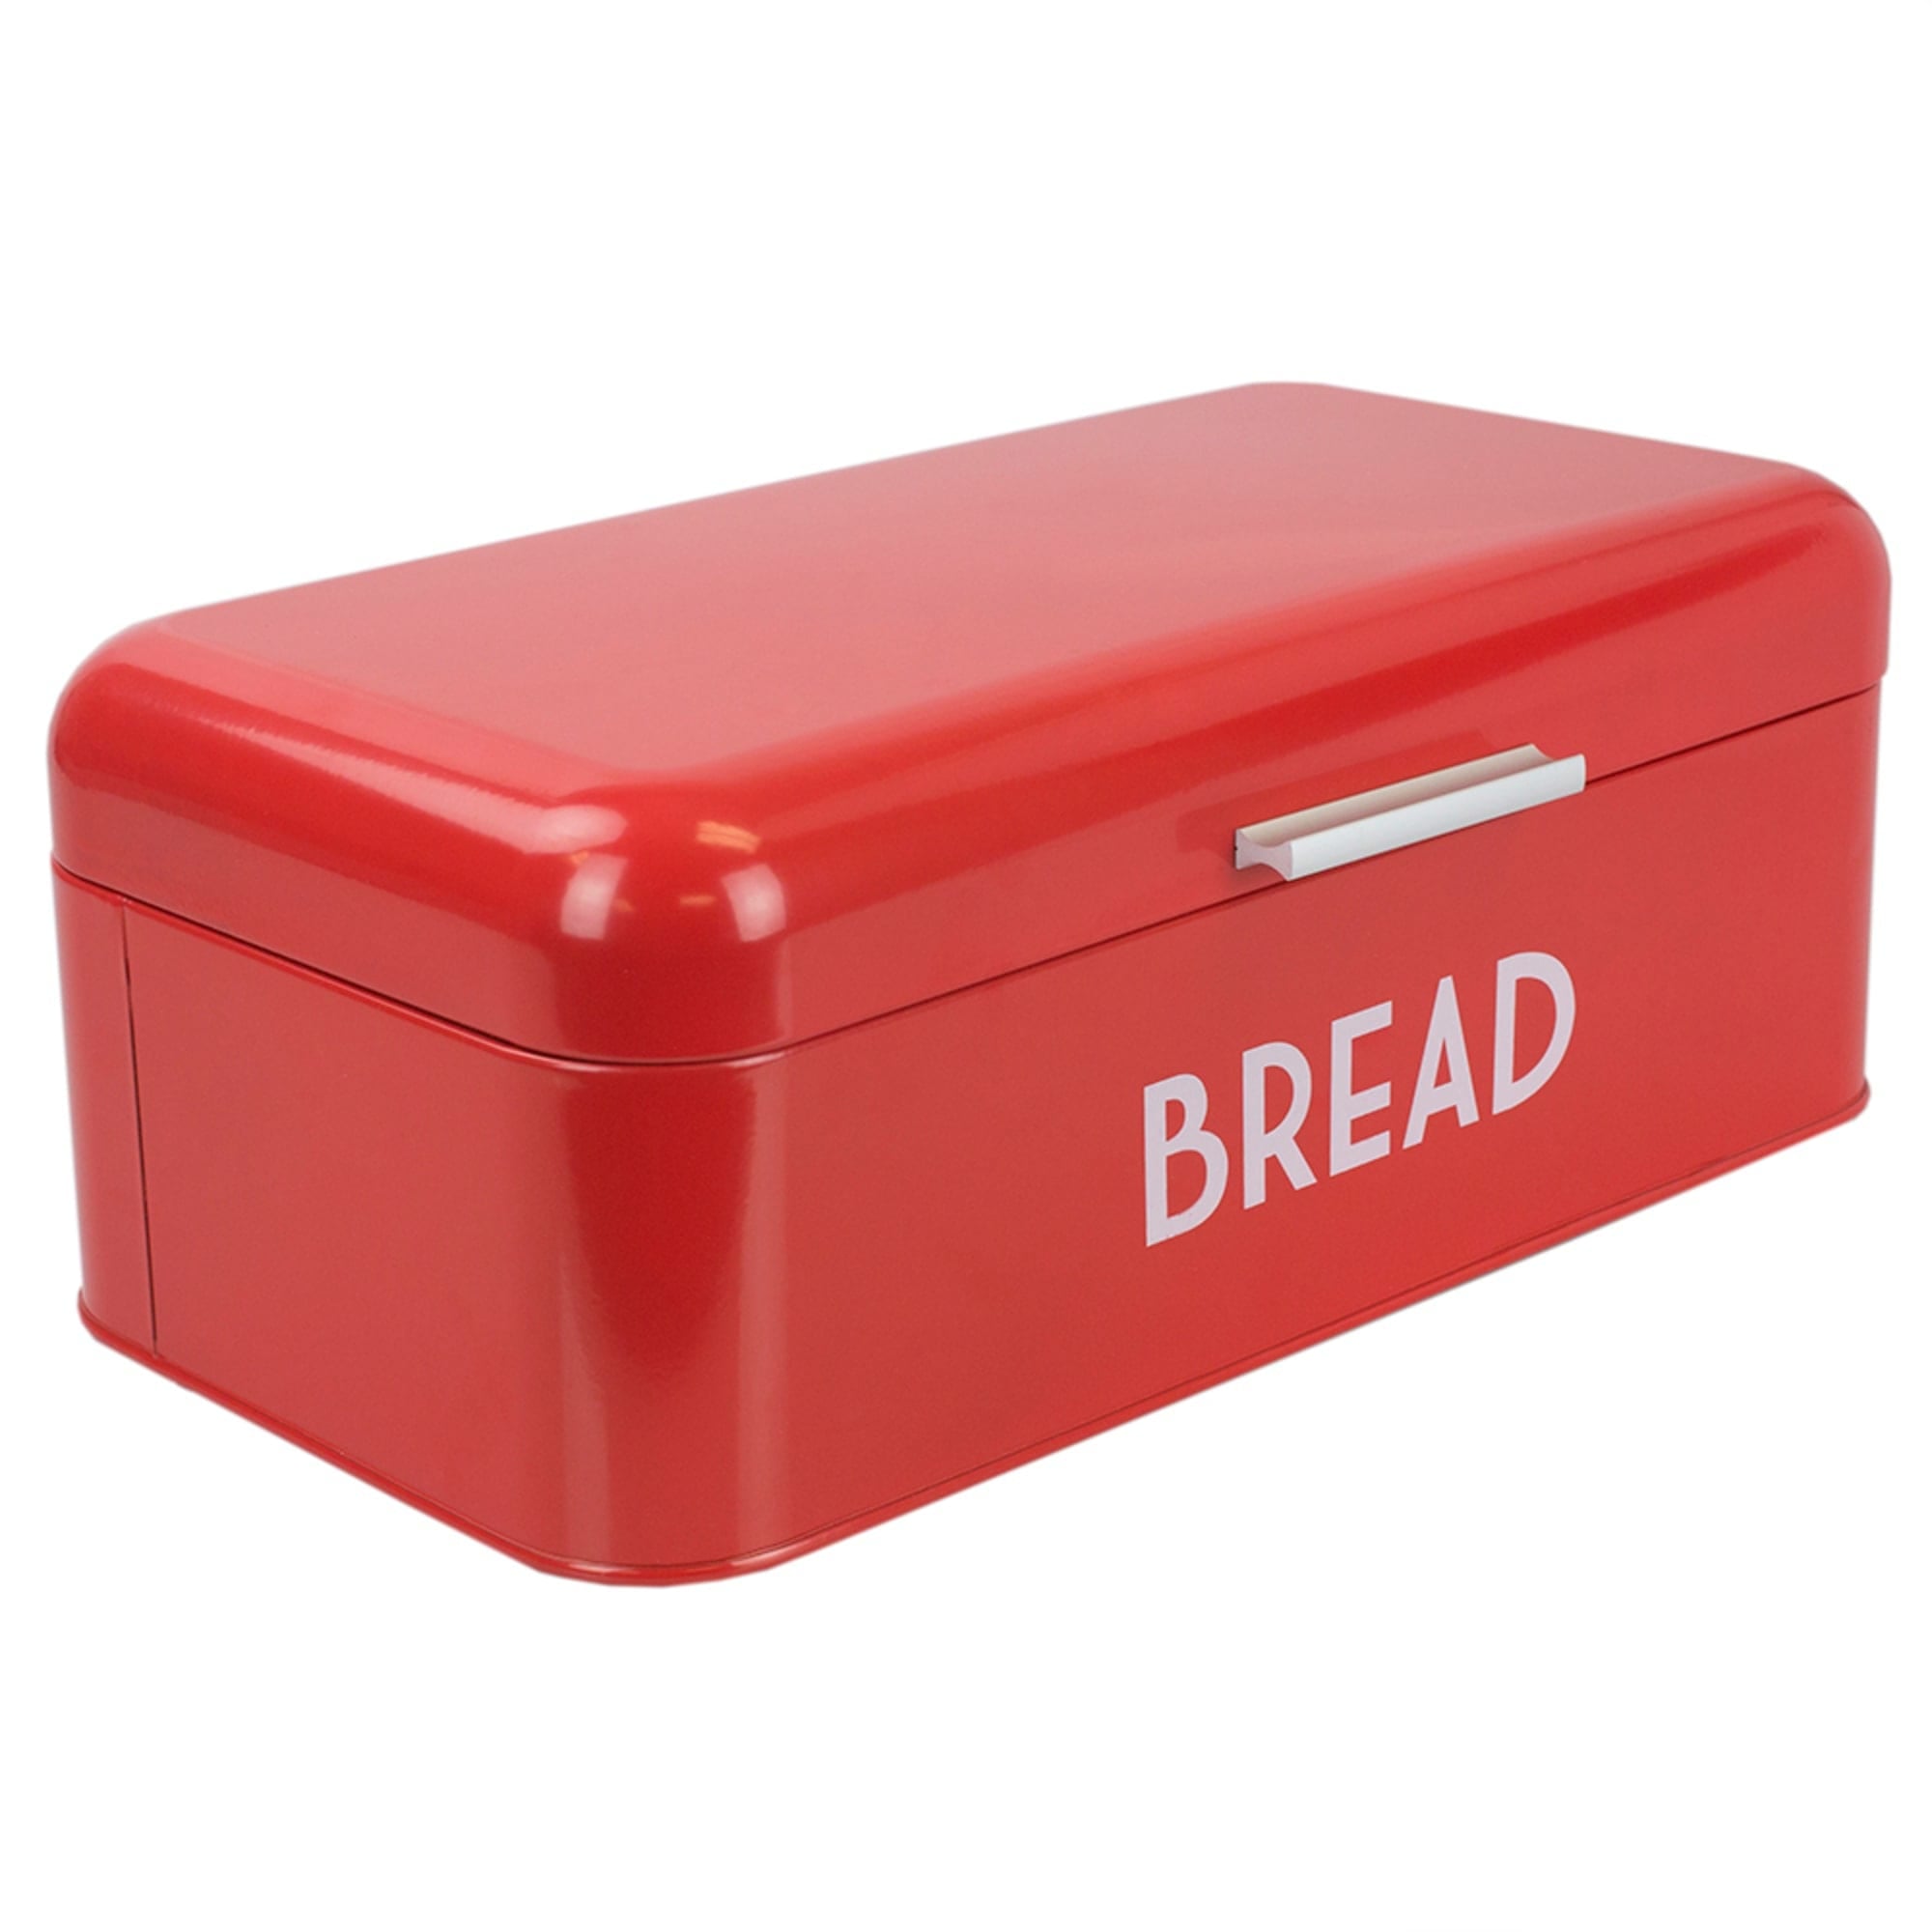 Home Basics Metal Bread Box with Lid $25.00 EACH, CASE PACK OF 4